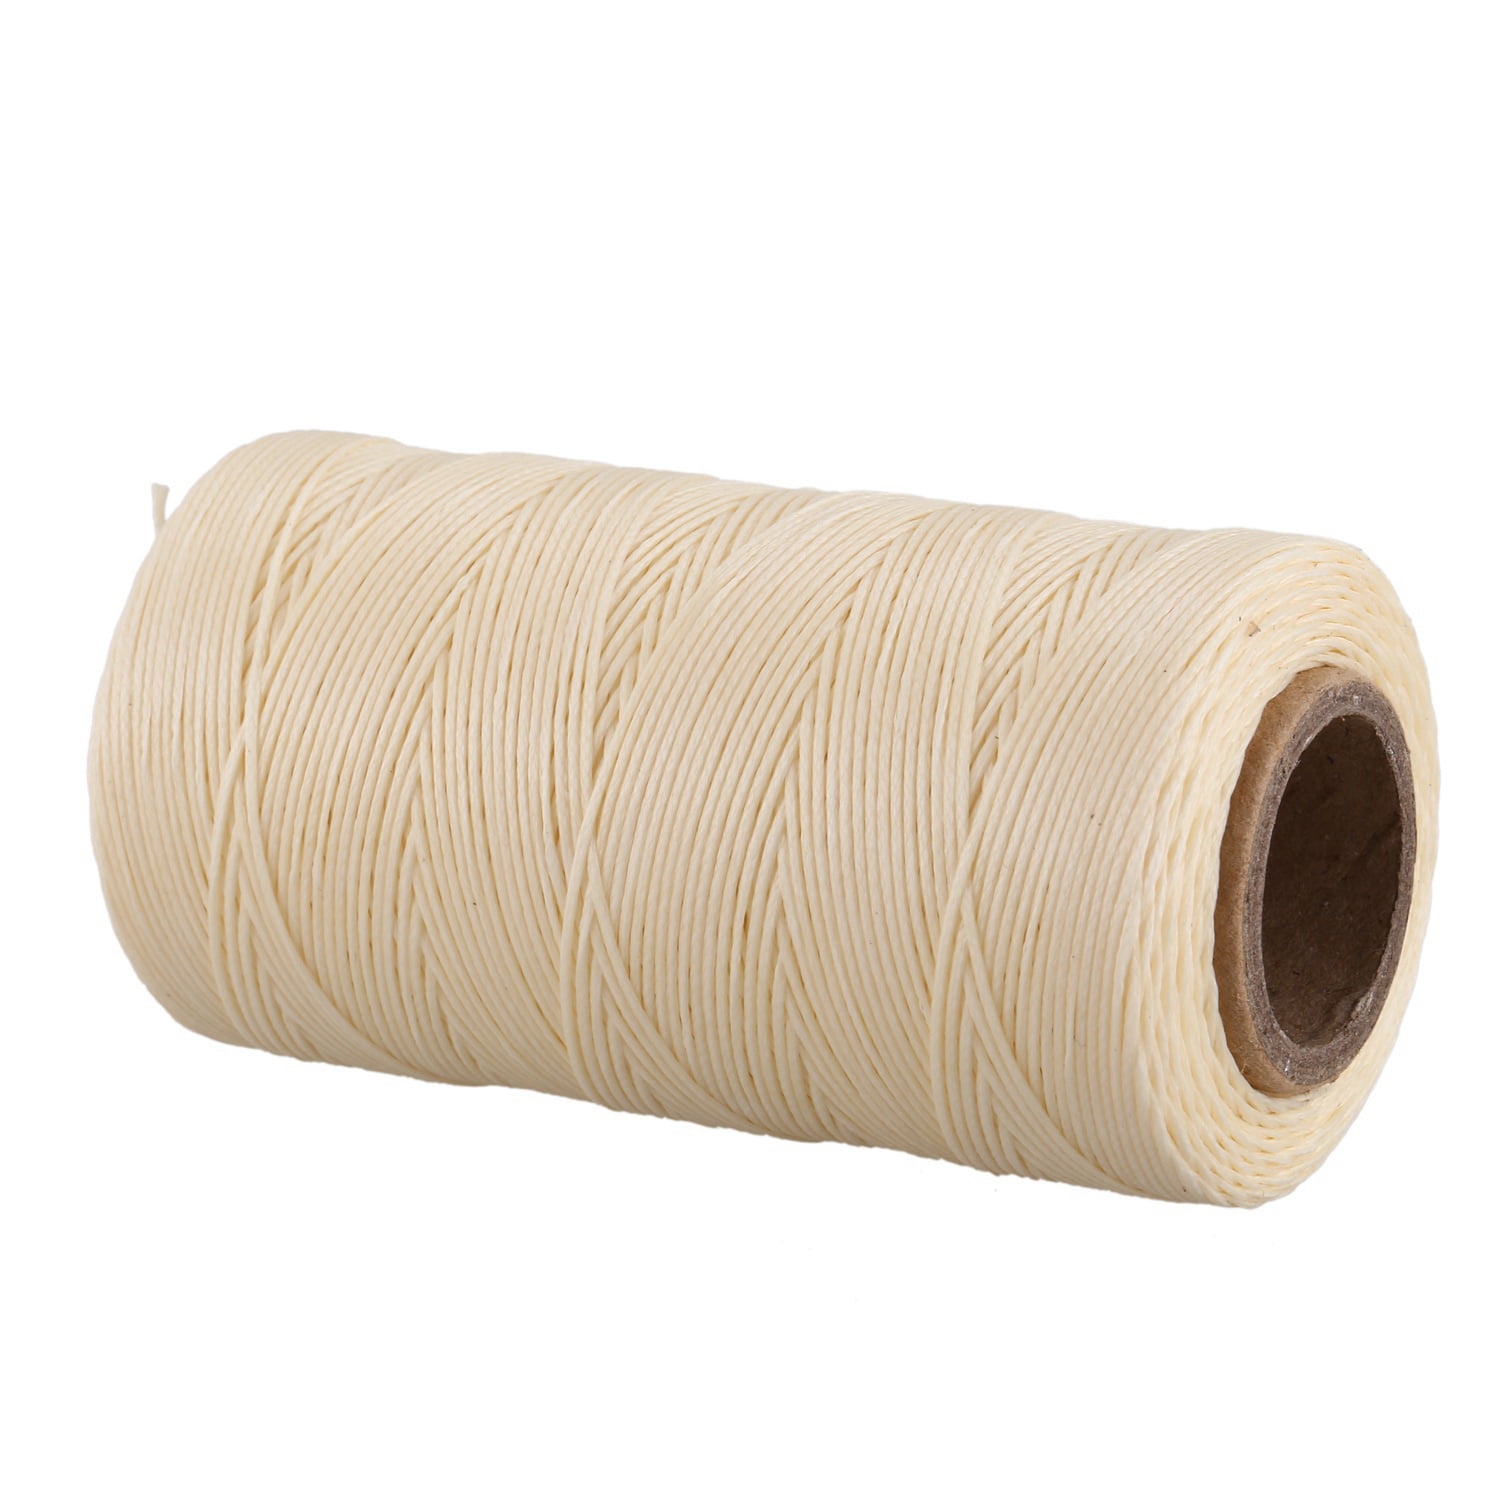 260M 150D 1MM Leather Sewing Waxed Wax Thread Hand DIY Stitching Cord Craft 